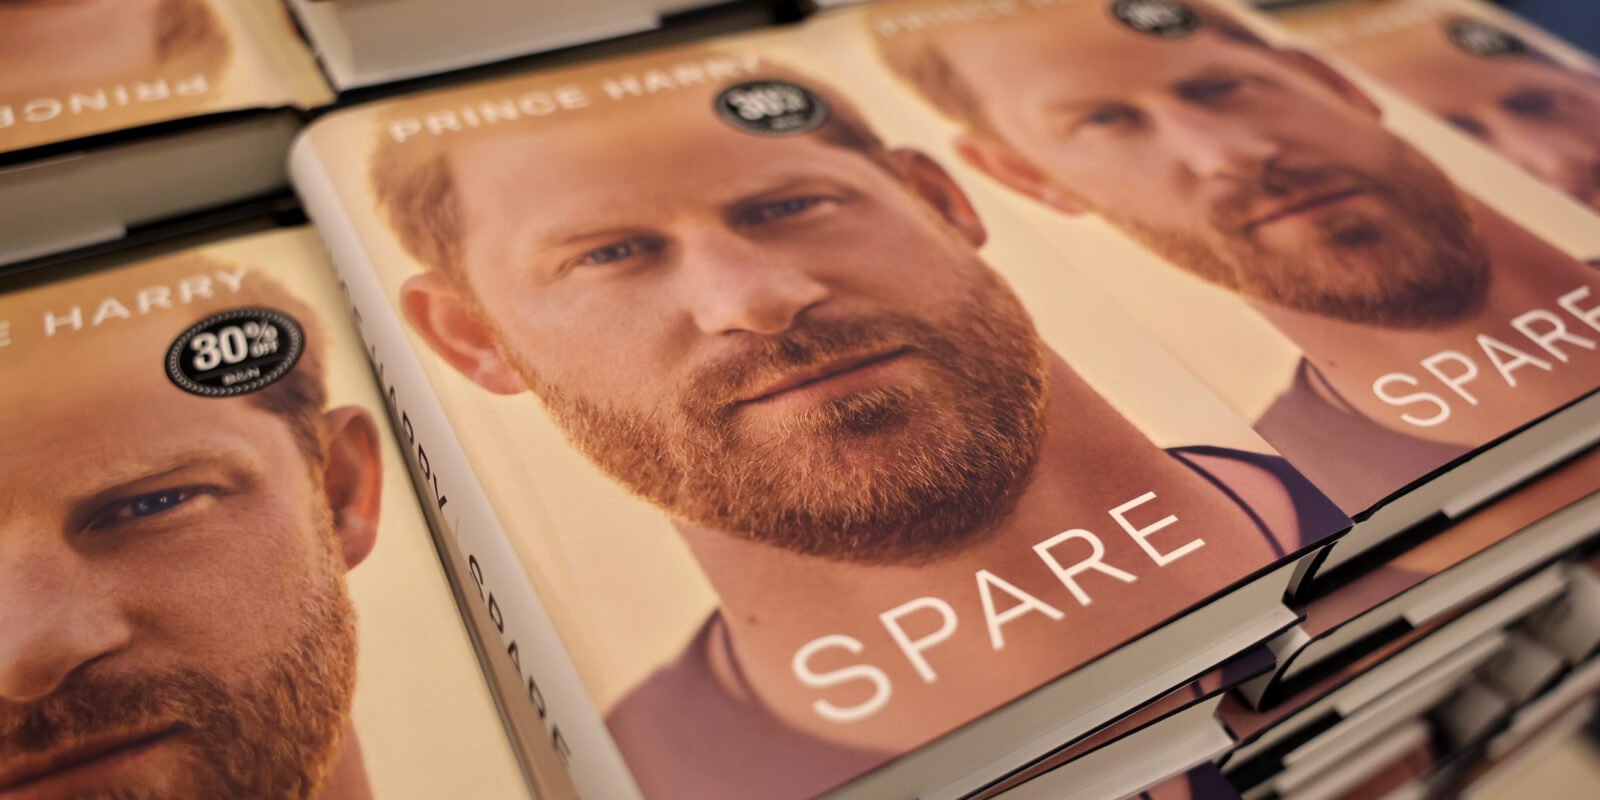 Copies of Prince Harry's book 'Spare' on sale.